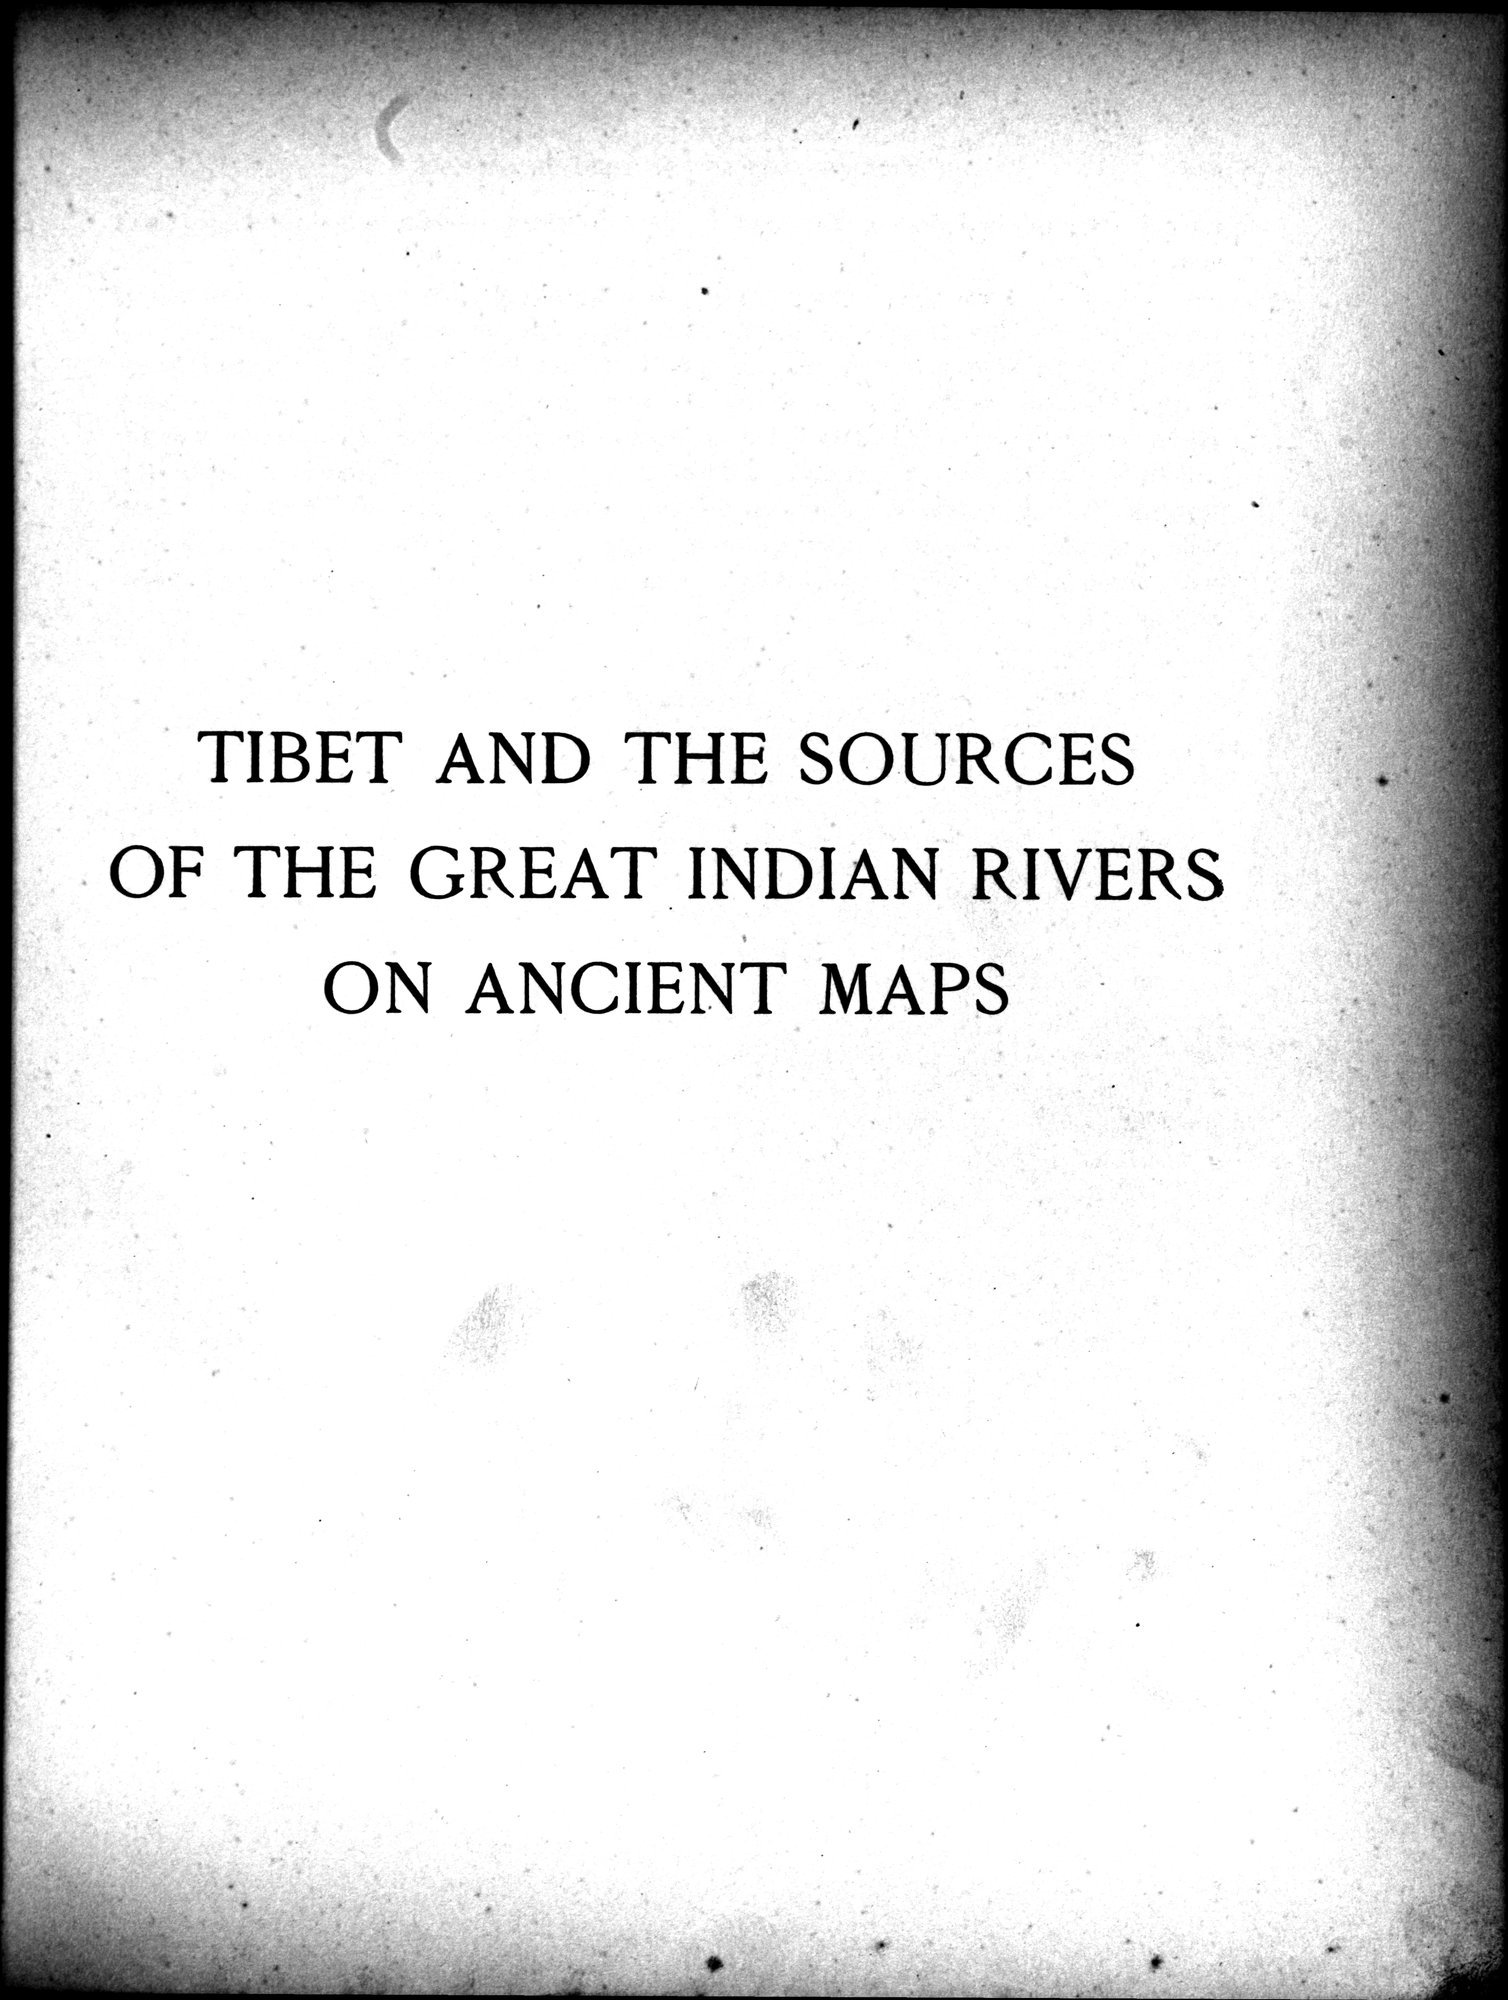 Southern Tibet : vol.1 / Page 235 (Grayscale High Resolution Image)